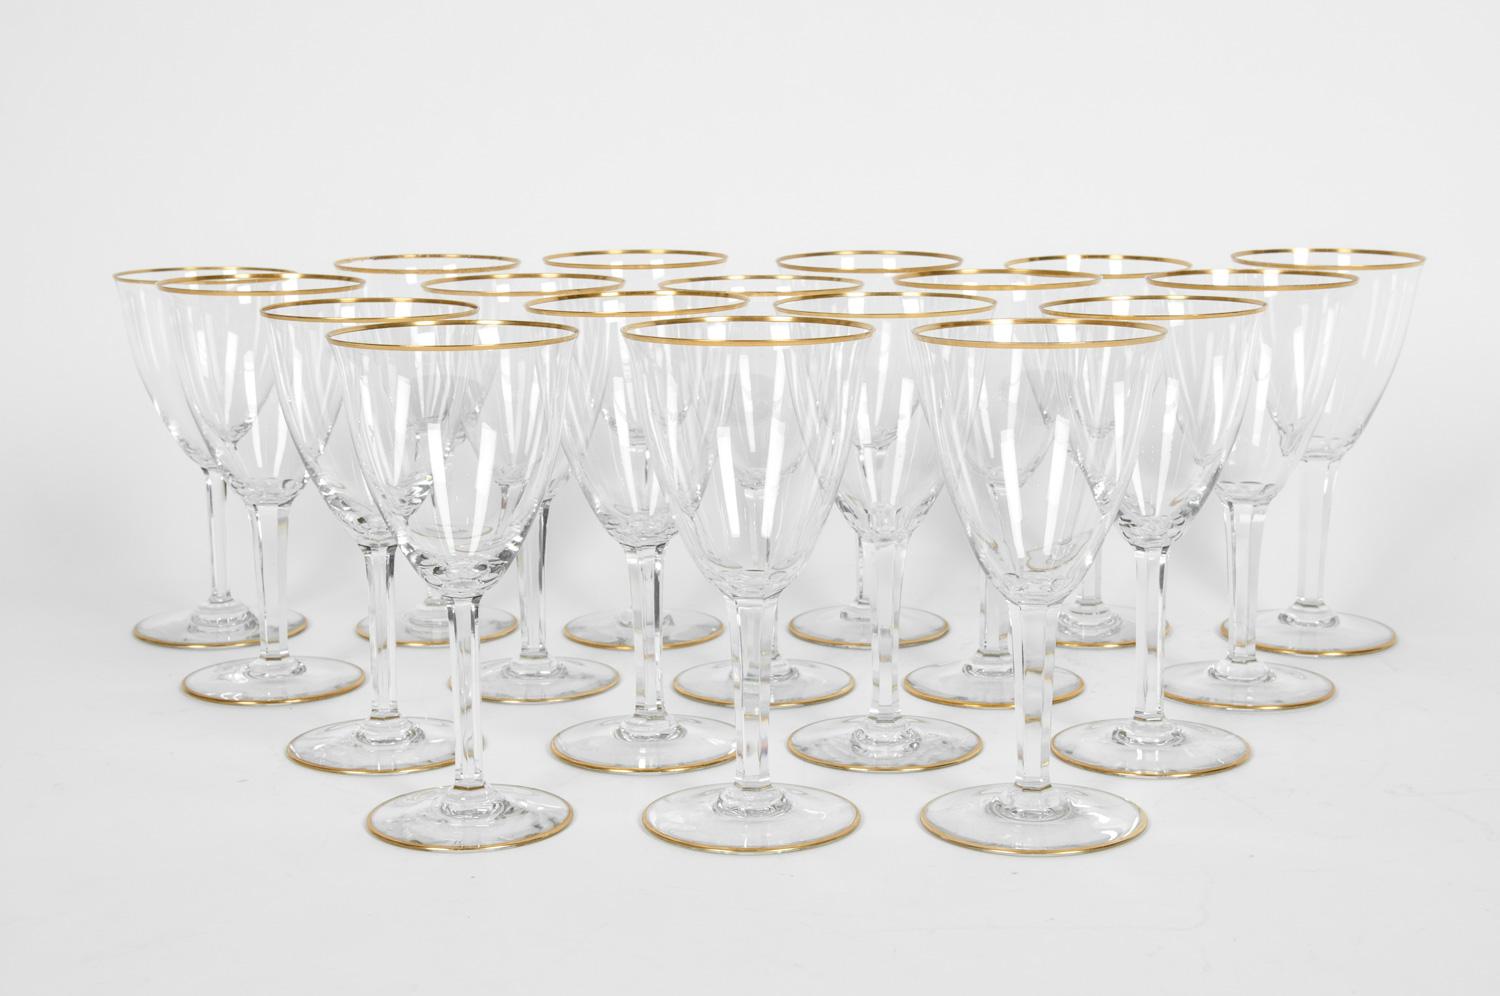 Vintage Baccarat crystal set of 18 wine or water glasses with gold trimmed top and base. Maker's mark undersigned on each glass. Excellent condition. Each glass measure 7 3/8 inches tall x 3 5/8 inches across x 3 1/4 inches base.